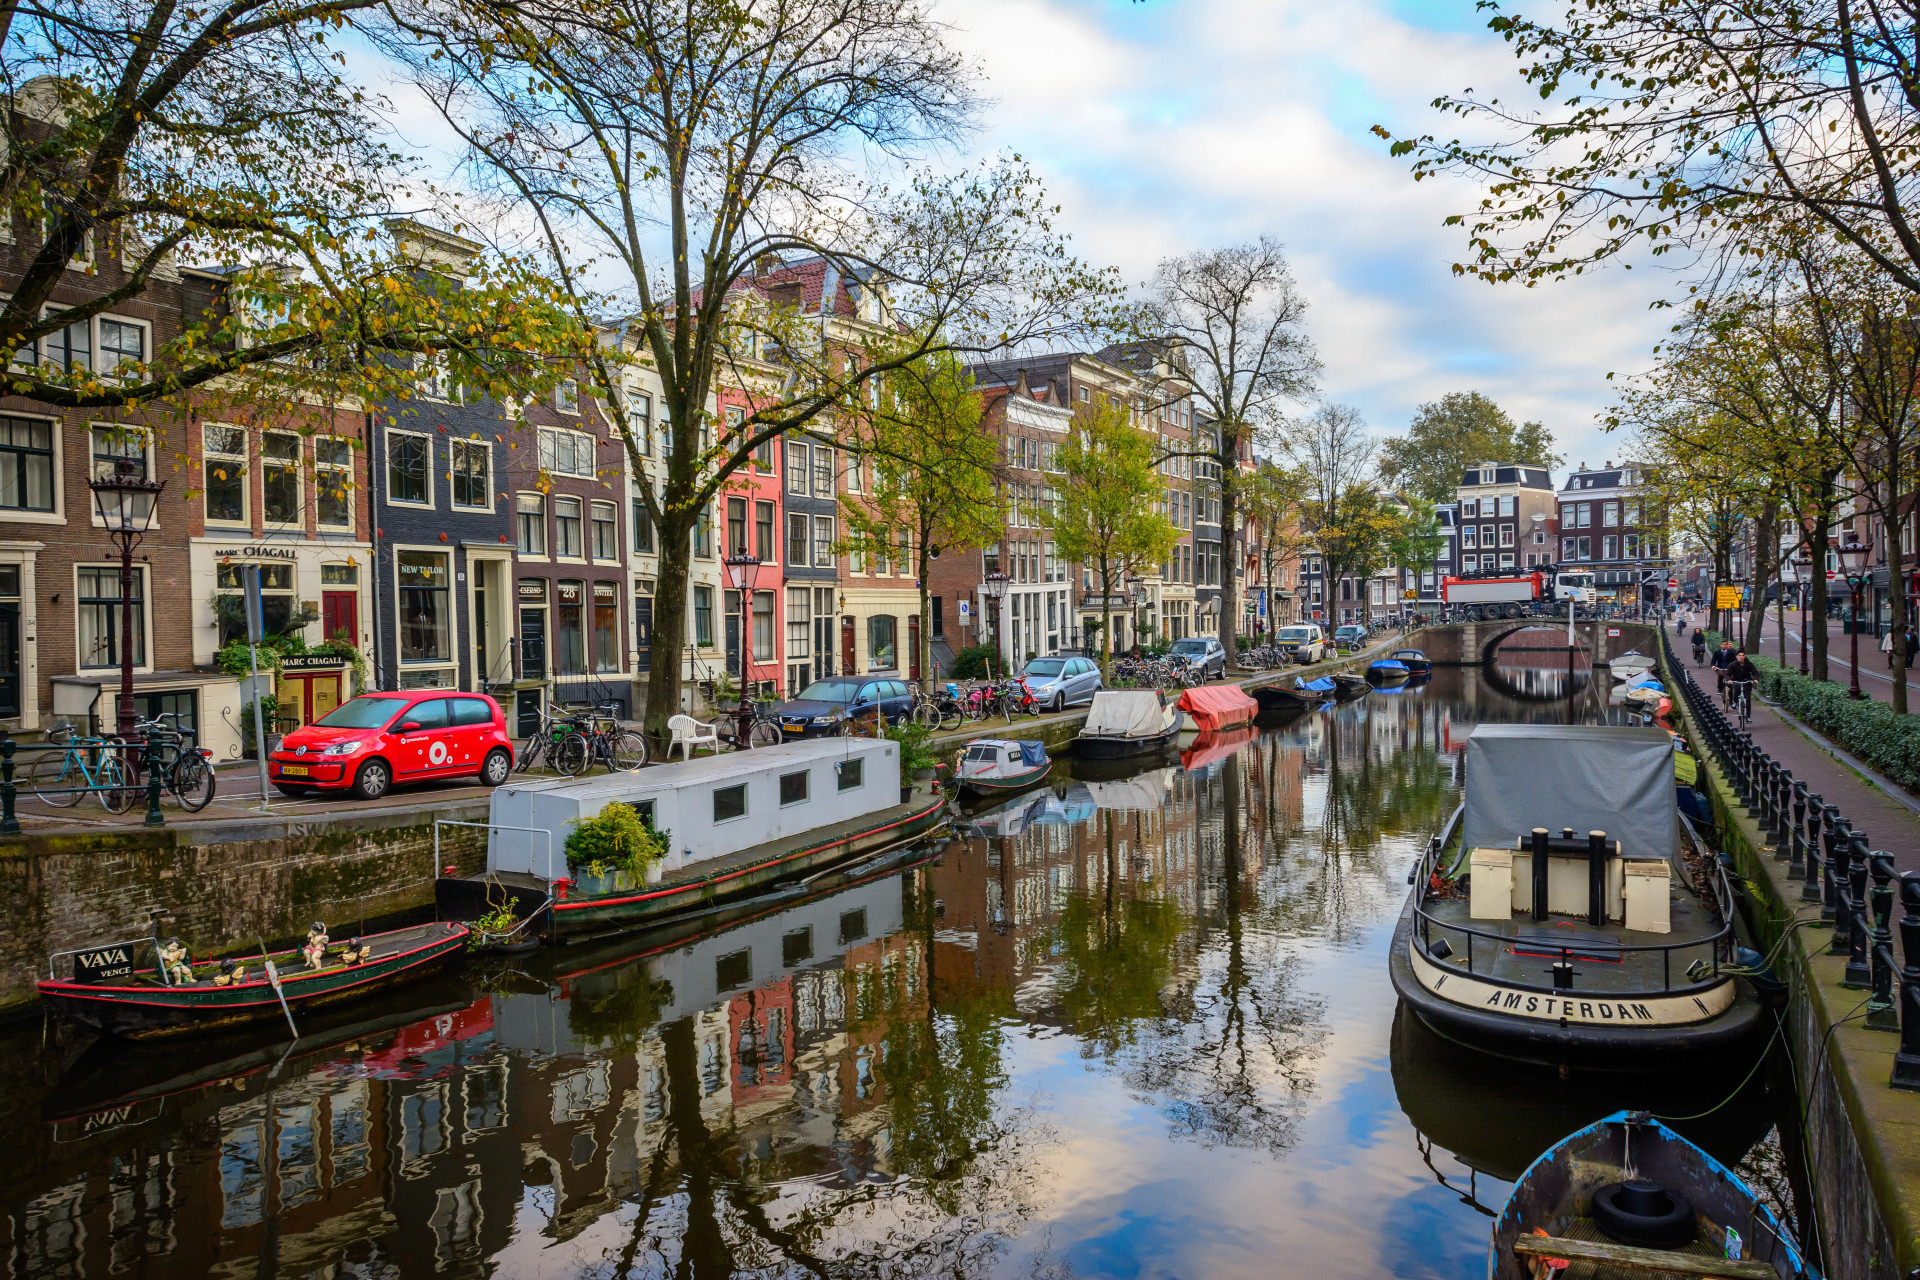 The capital of the Netherlands, Amsterdam is perfect to explore on foot, especially along the canals at Grachtengordel. <p><a href="https://www.msn.com/en-sg/community/channel/vid-7xx8mnucu55yw63we9va2gwr7uihbxwc68fxqp25x6tg4ftibpra?cvid=94631541bc0f4f89bfd59158d696ad7e">Follow us and access great exclusive content every day</a></p>